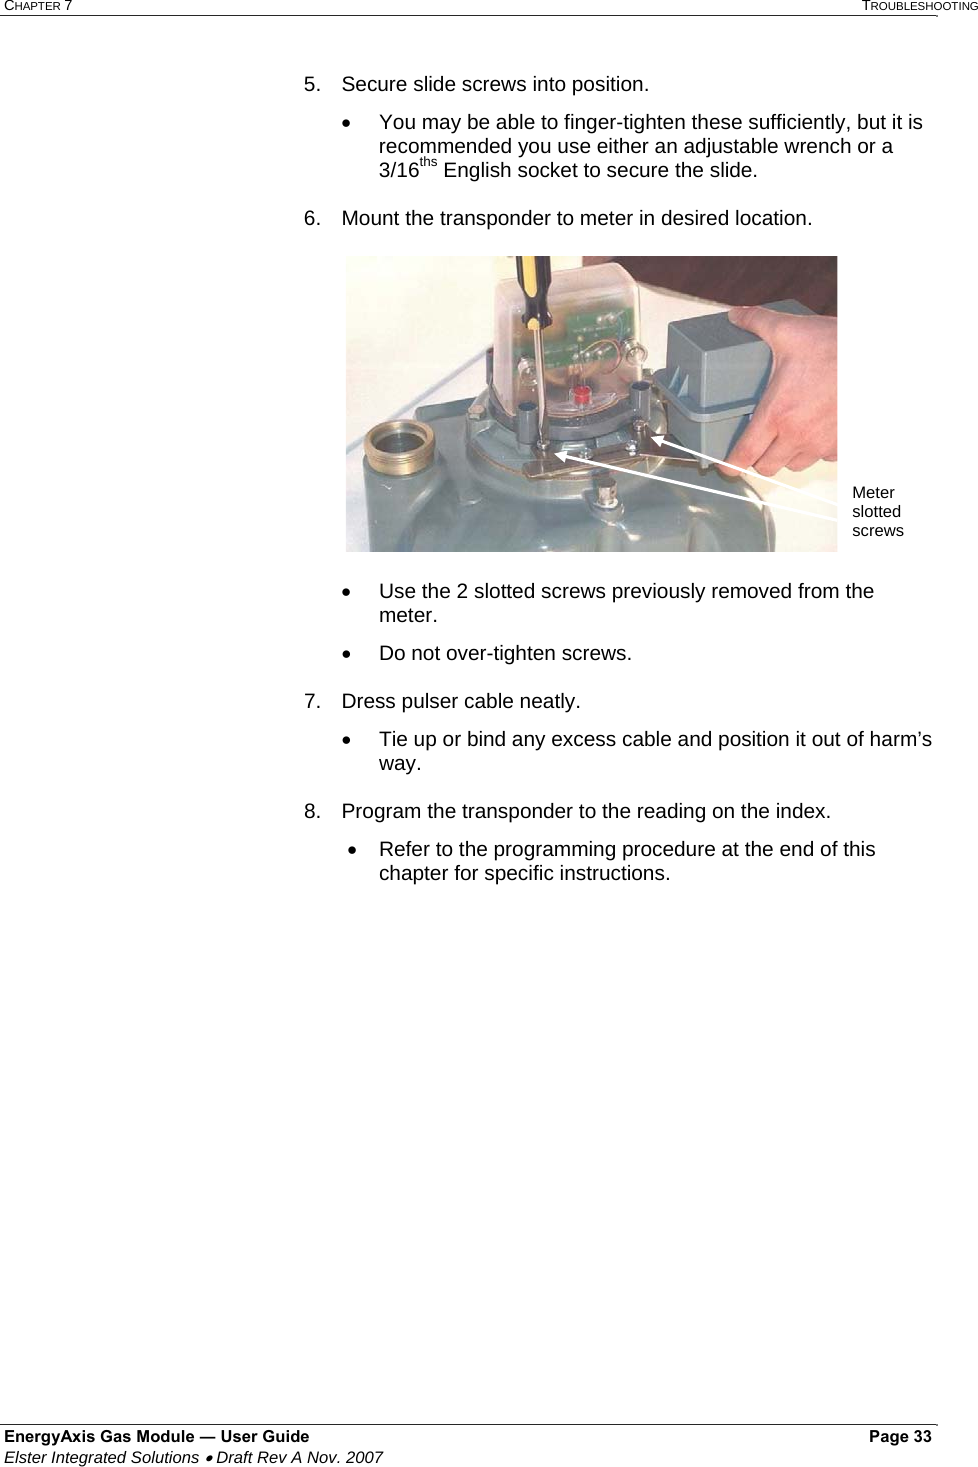 CHAPTER 7   TROUBLESHOOTING EnergyAxis Gas Module ― User Guide   Page 33  Elster Integrated Solutions • Draft Rev A Nov. 2007  5.  Secure slide screws into position. •  You may be able to finger-tighten these sufficiently, but it is recommended you use either an adjustable wrench or a 3/16ths English socket to secure the slide.  6.  Mount the transponder to meter in desired location.   •  Use the 2 slotted screws previously removed from the meter.  •  Do not over-tighten screws.  7.  Dress pulser cable neatly. •  Tie up or bind any excess cable and position it out of harm’s way.  8.  Program the transponder to the reading on the index.   •  Refer to the programming procedure at the end of this chapter for specific instructions.      Meter slotted screws 